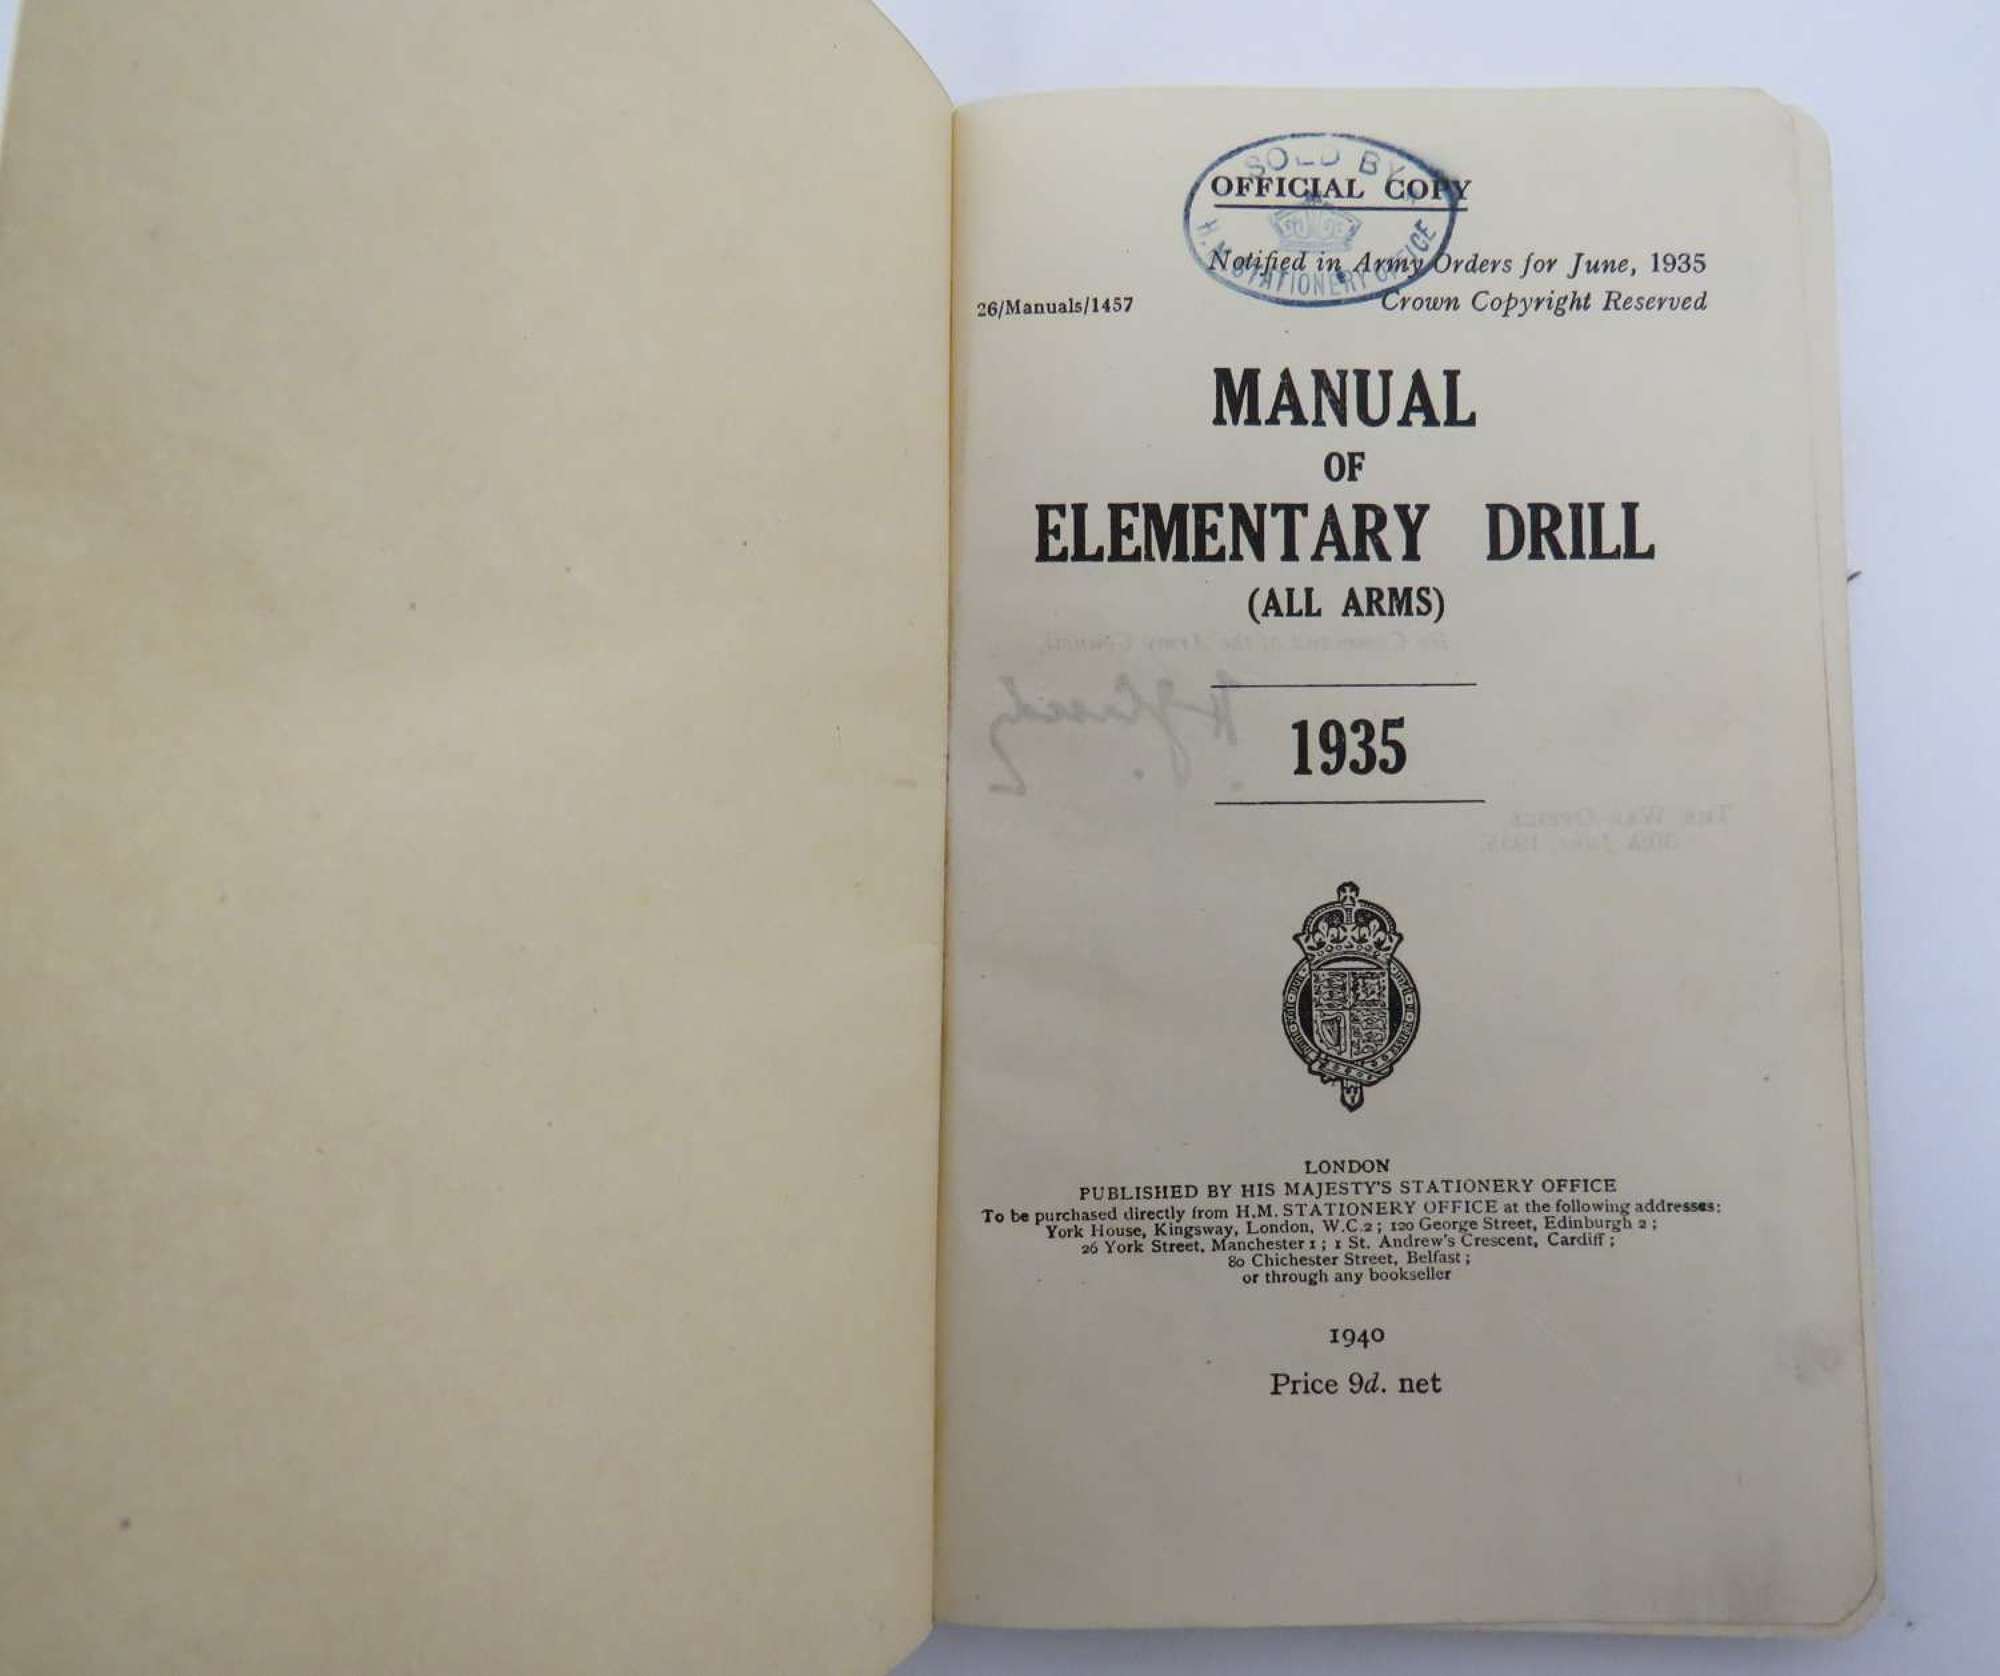 Manual of Elementary Drill 1935